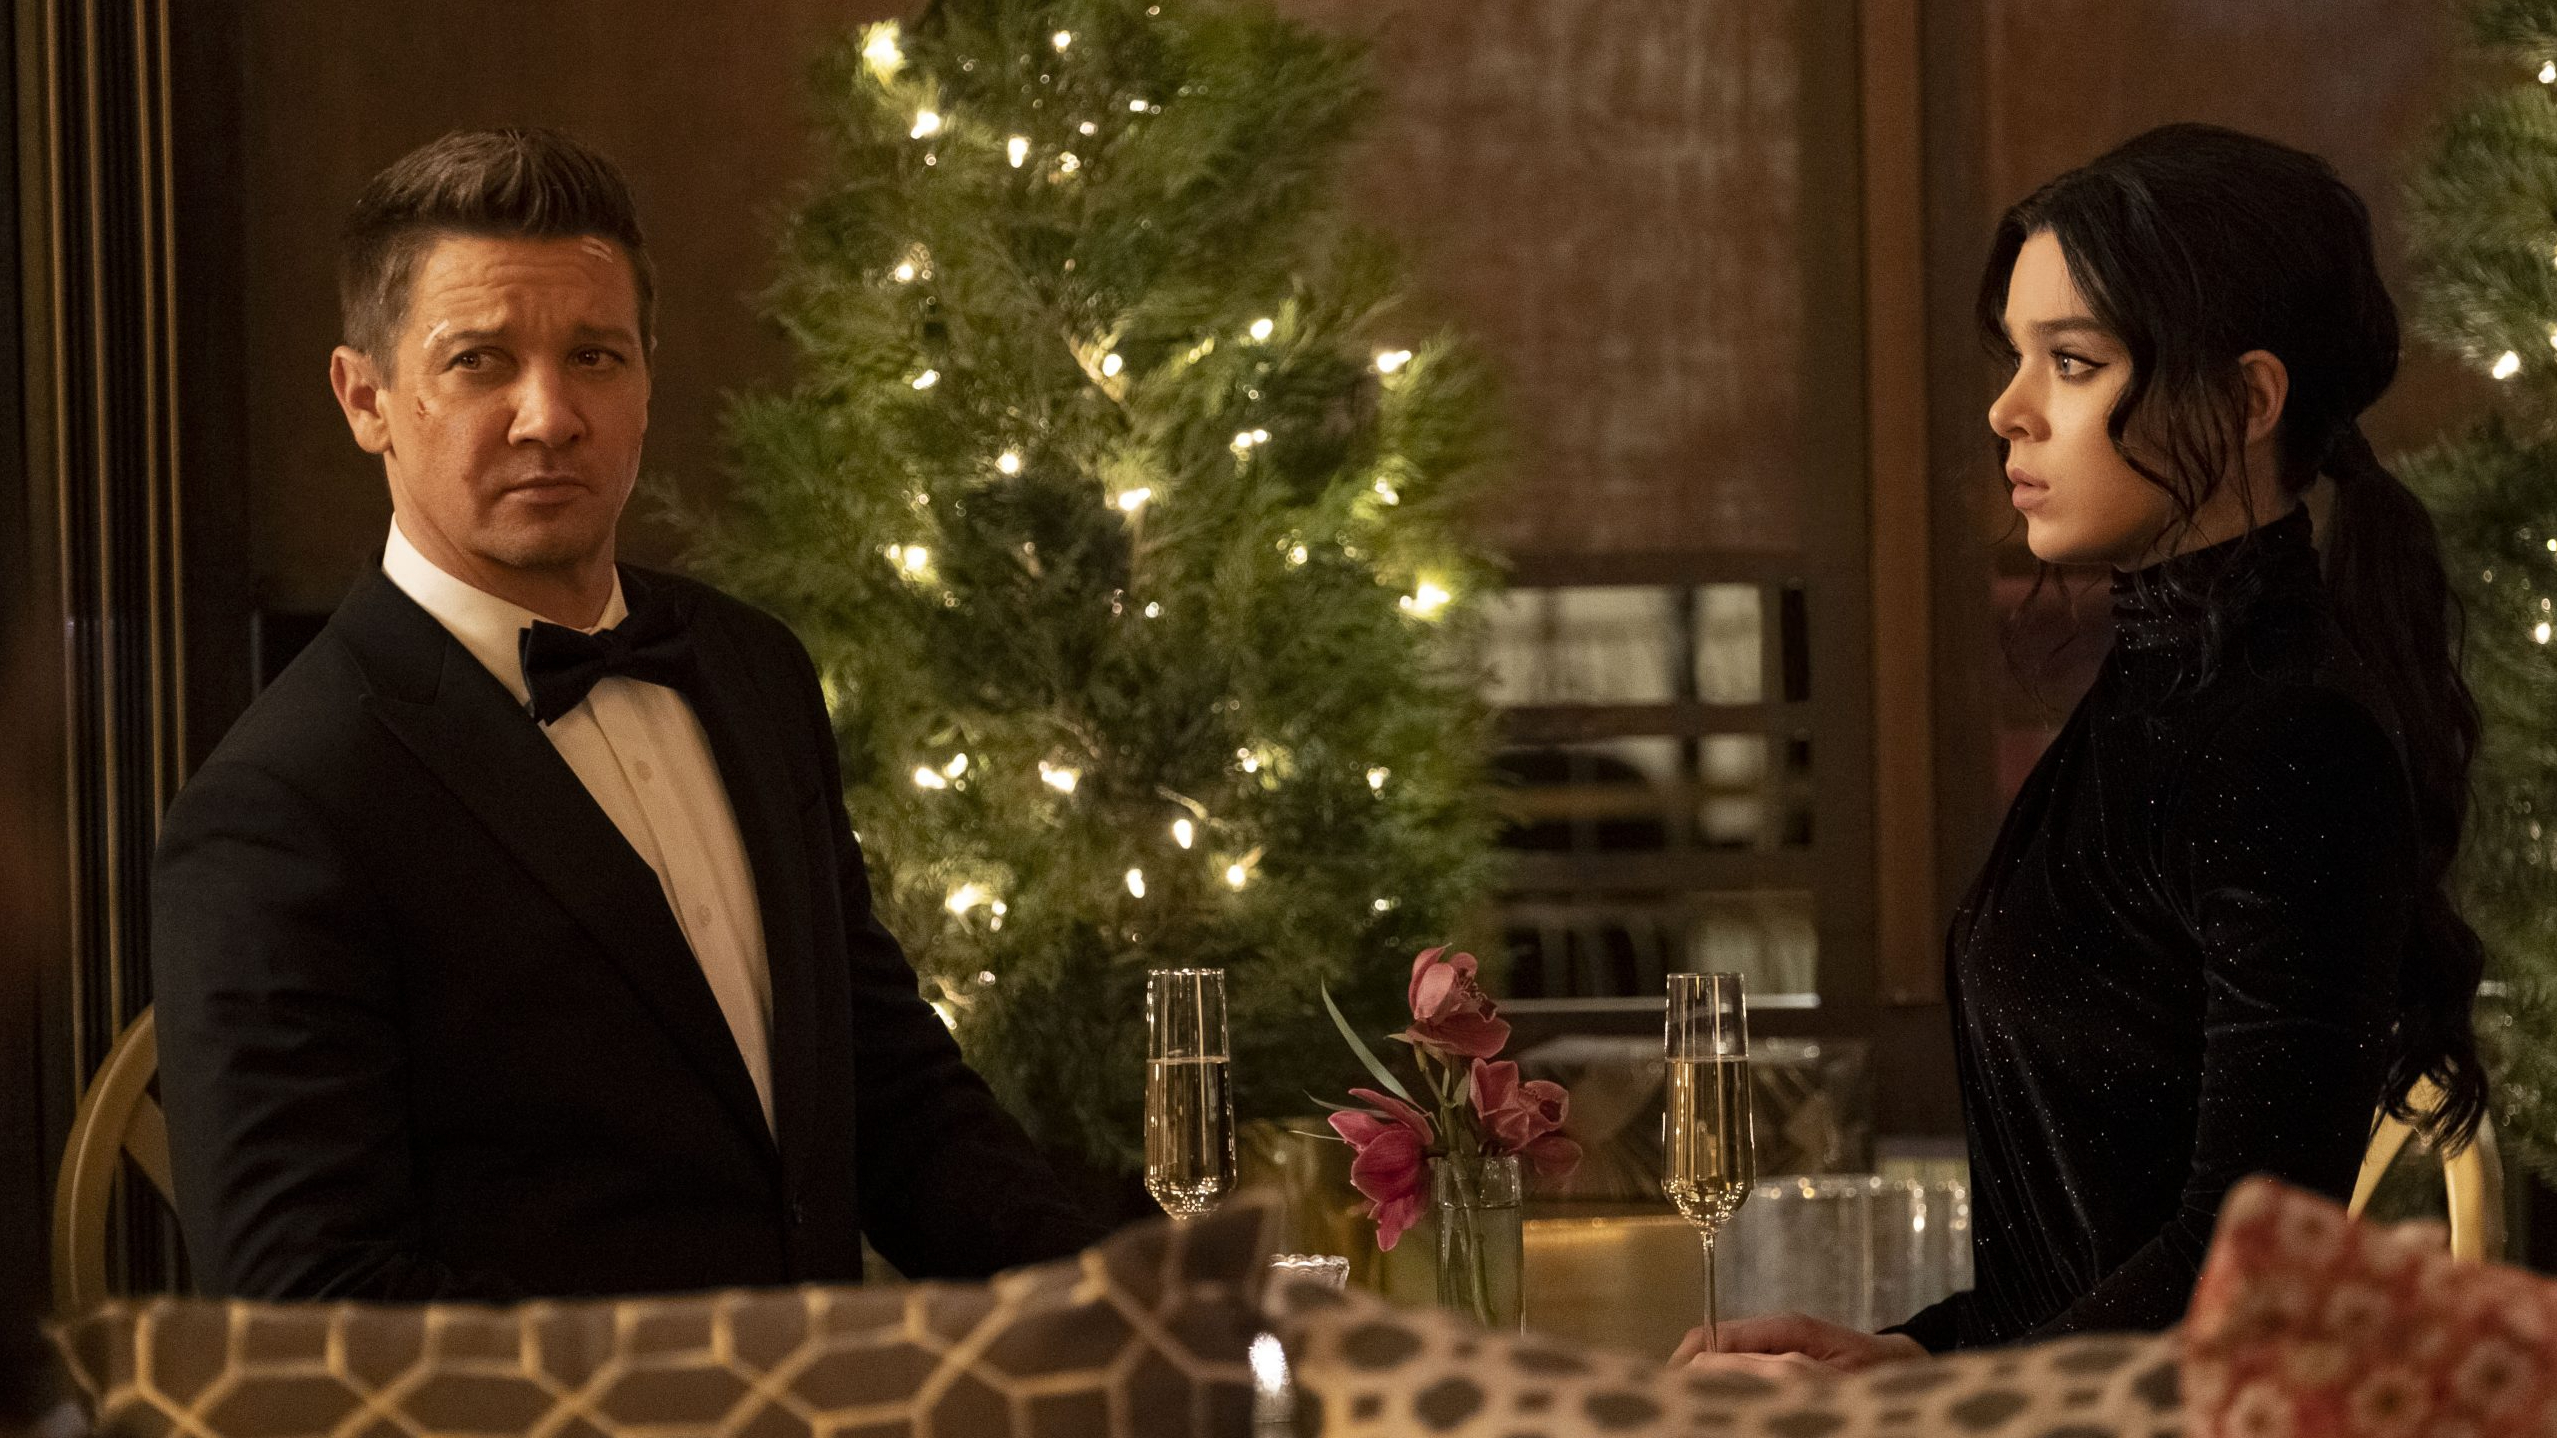 Jeremy Renner as Clint Barton in a tuxedo and bow tie shares champagne with Hailee Steinfeld as Kate Bishop in a black dress by a Christmas tree in the season finale of HAWKEYE on Disney+